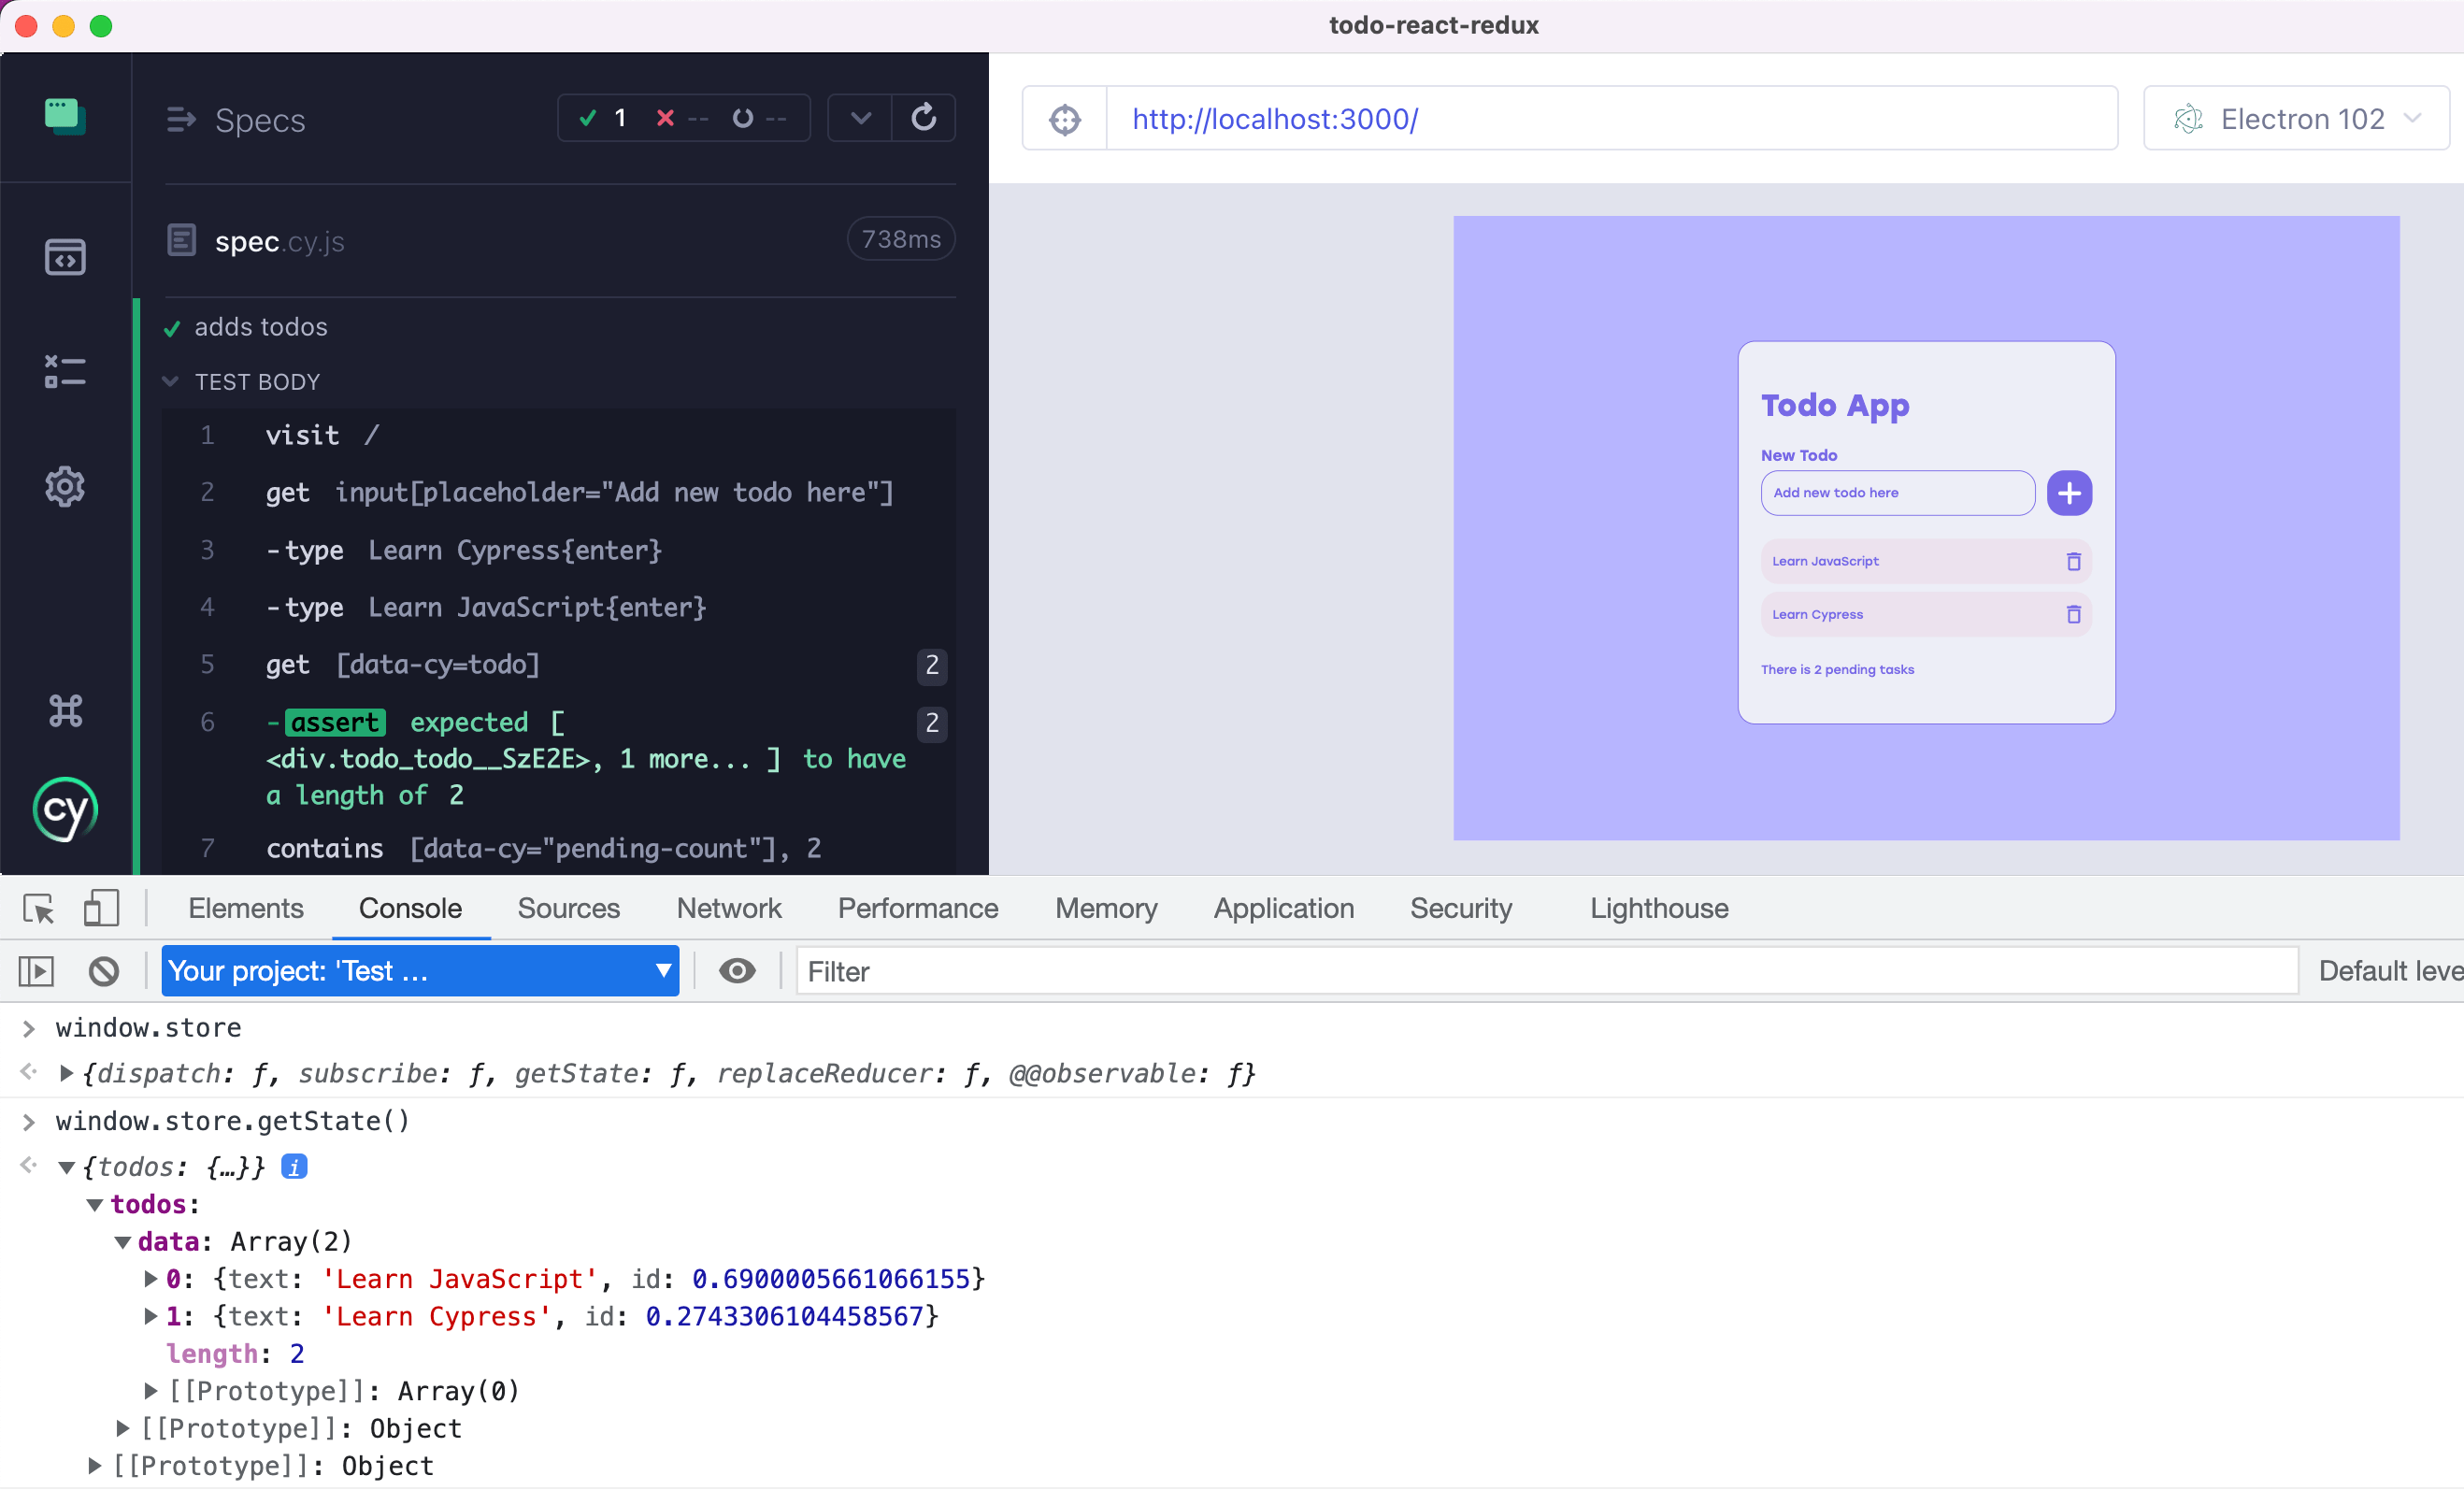 Access the Redux store from DevTools console